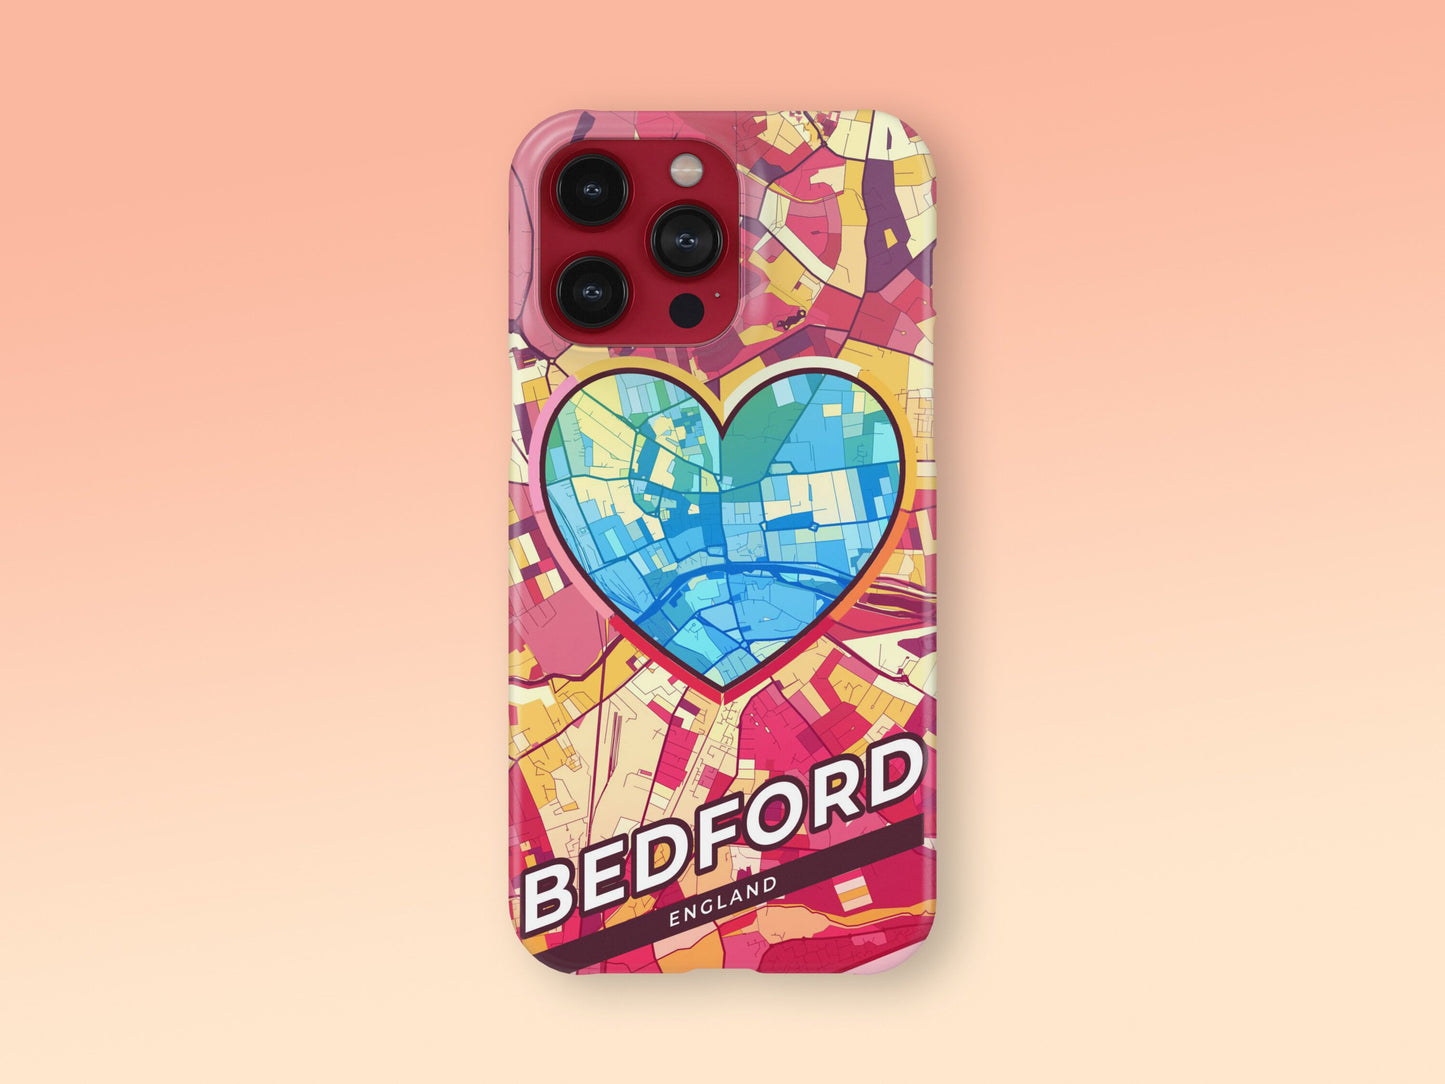 Bedford England slim phone case with colorful icon. Birthday, wedding or housewarming gift. Couple match cases. 2